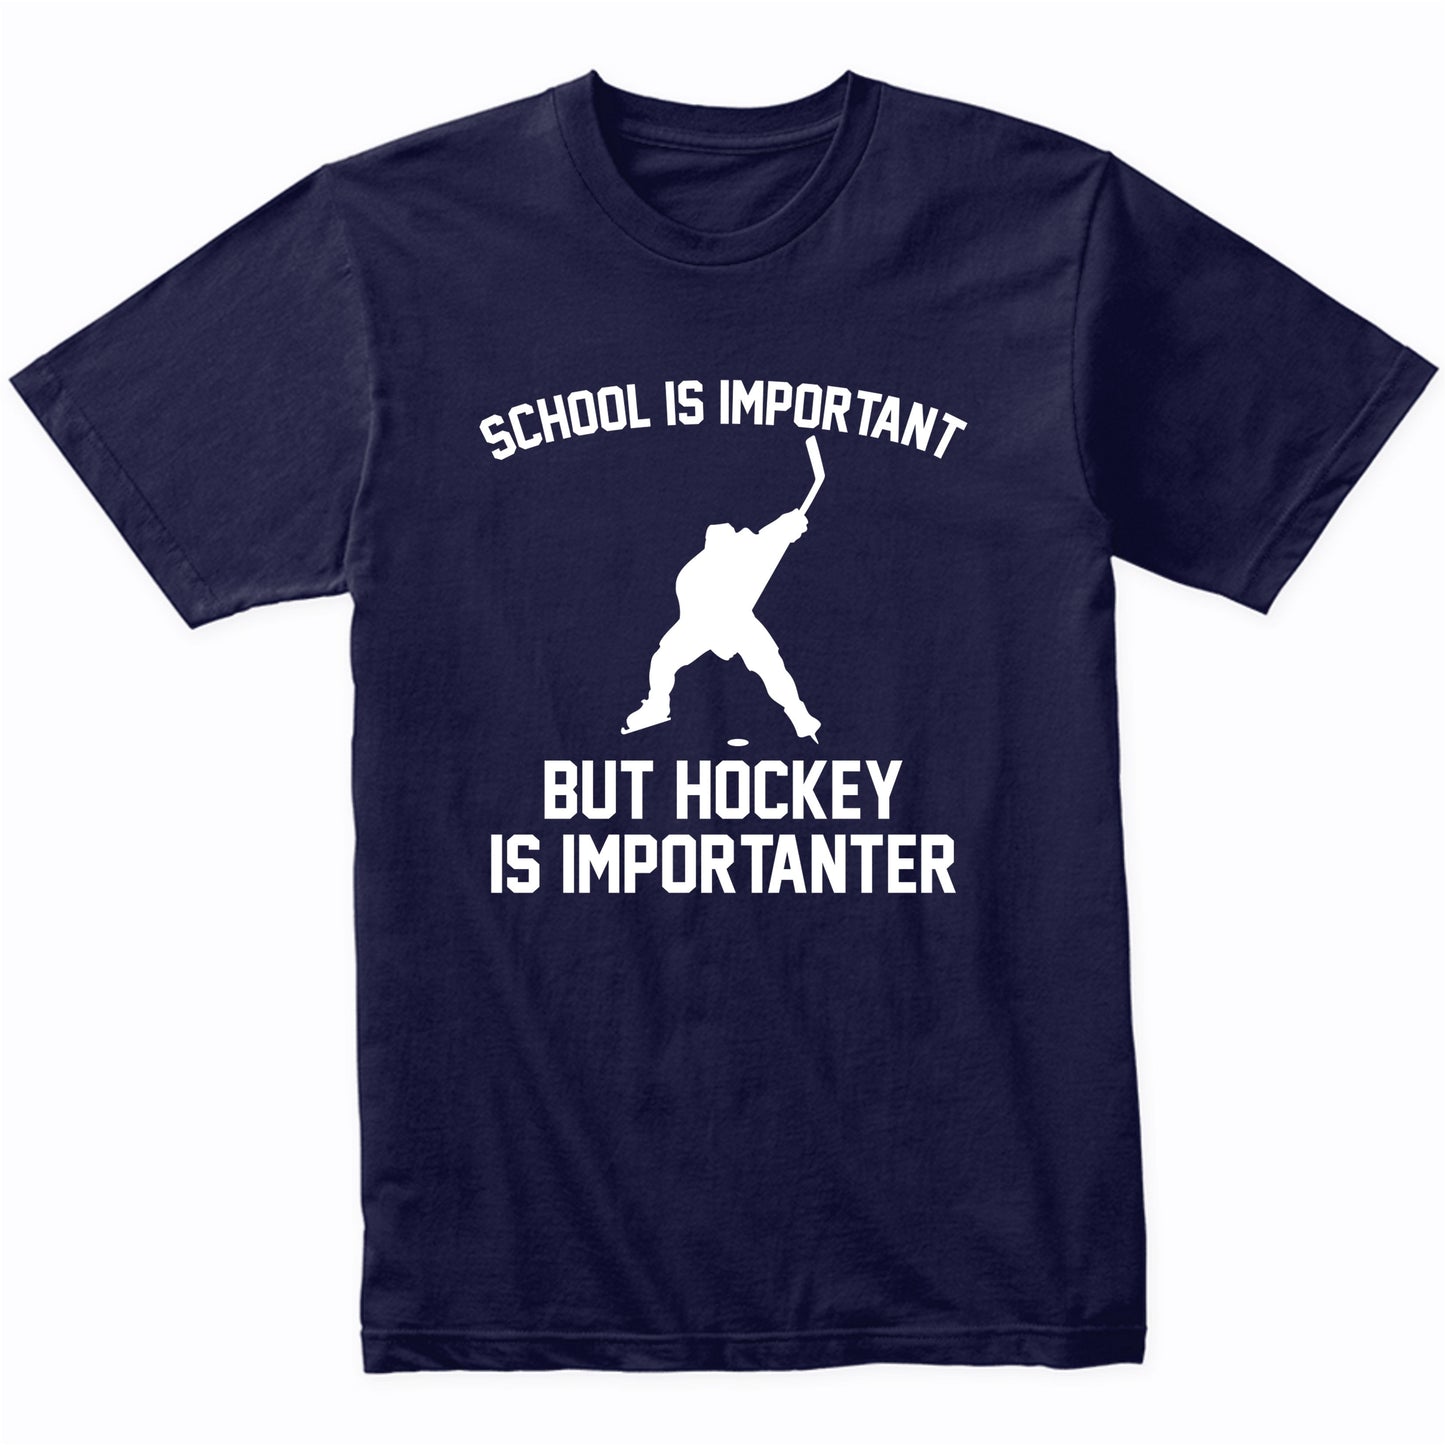 School Is Important But Hockey Is Importanter Funny Shirt